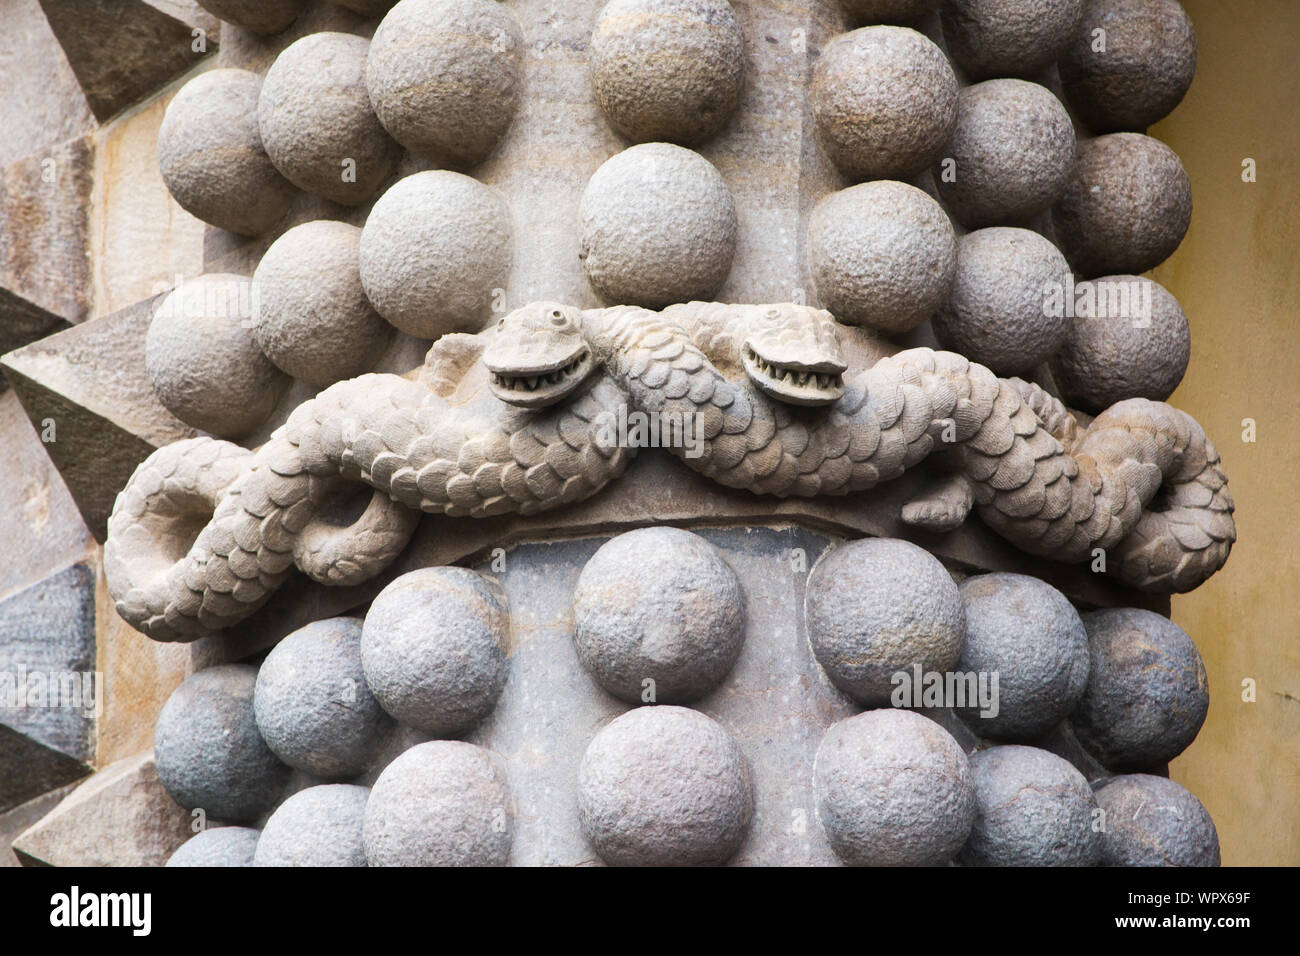 Decorative stone snakes and ball pattern on wall at the 19th century romanticist hilltop Castle of Pena Palace (Palácio da Pena), Sintra, Portugal. Stock Photo